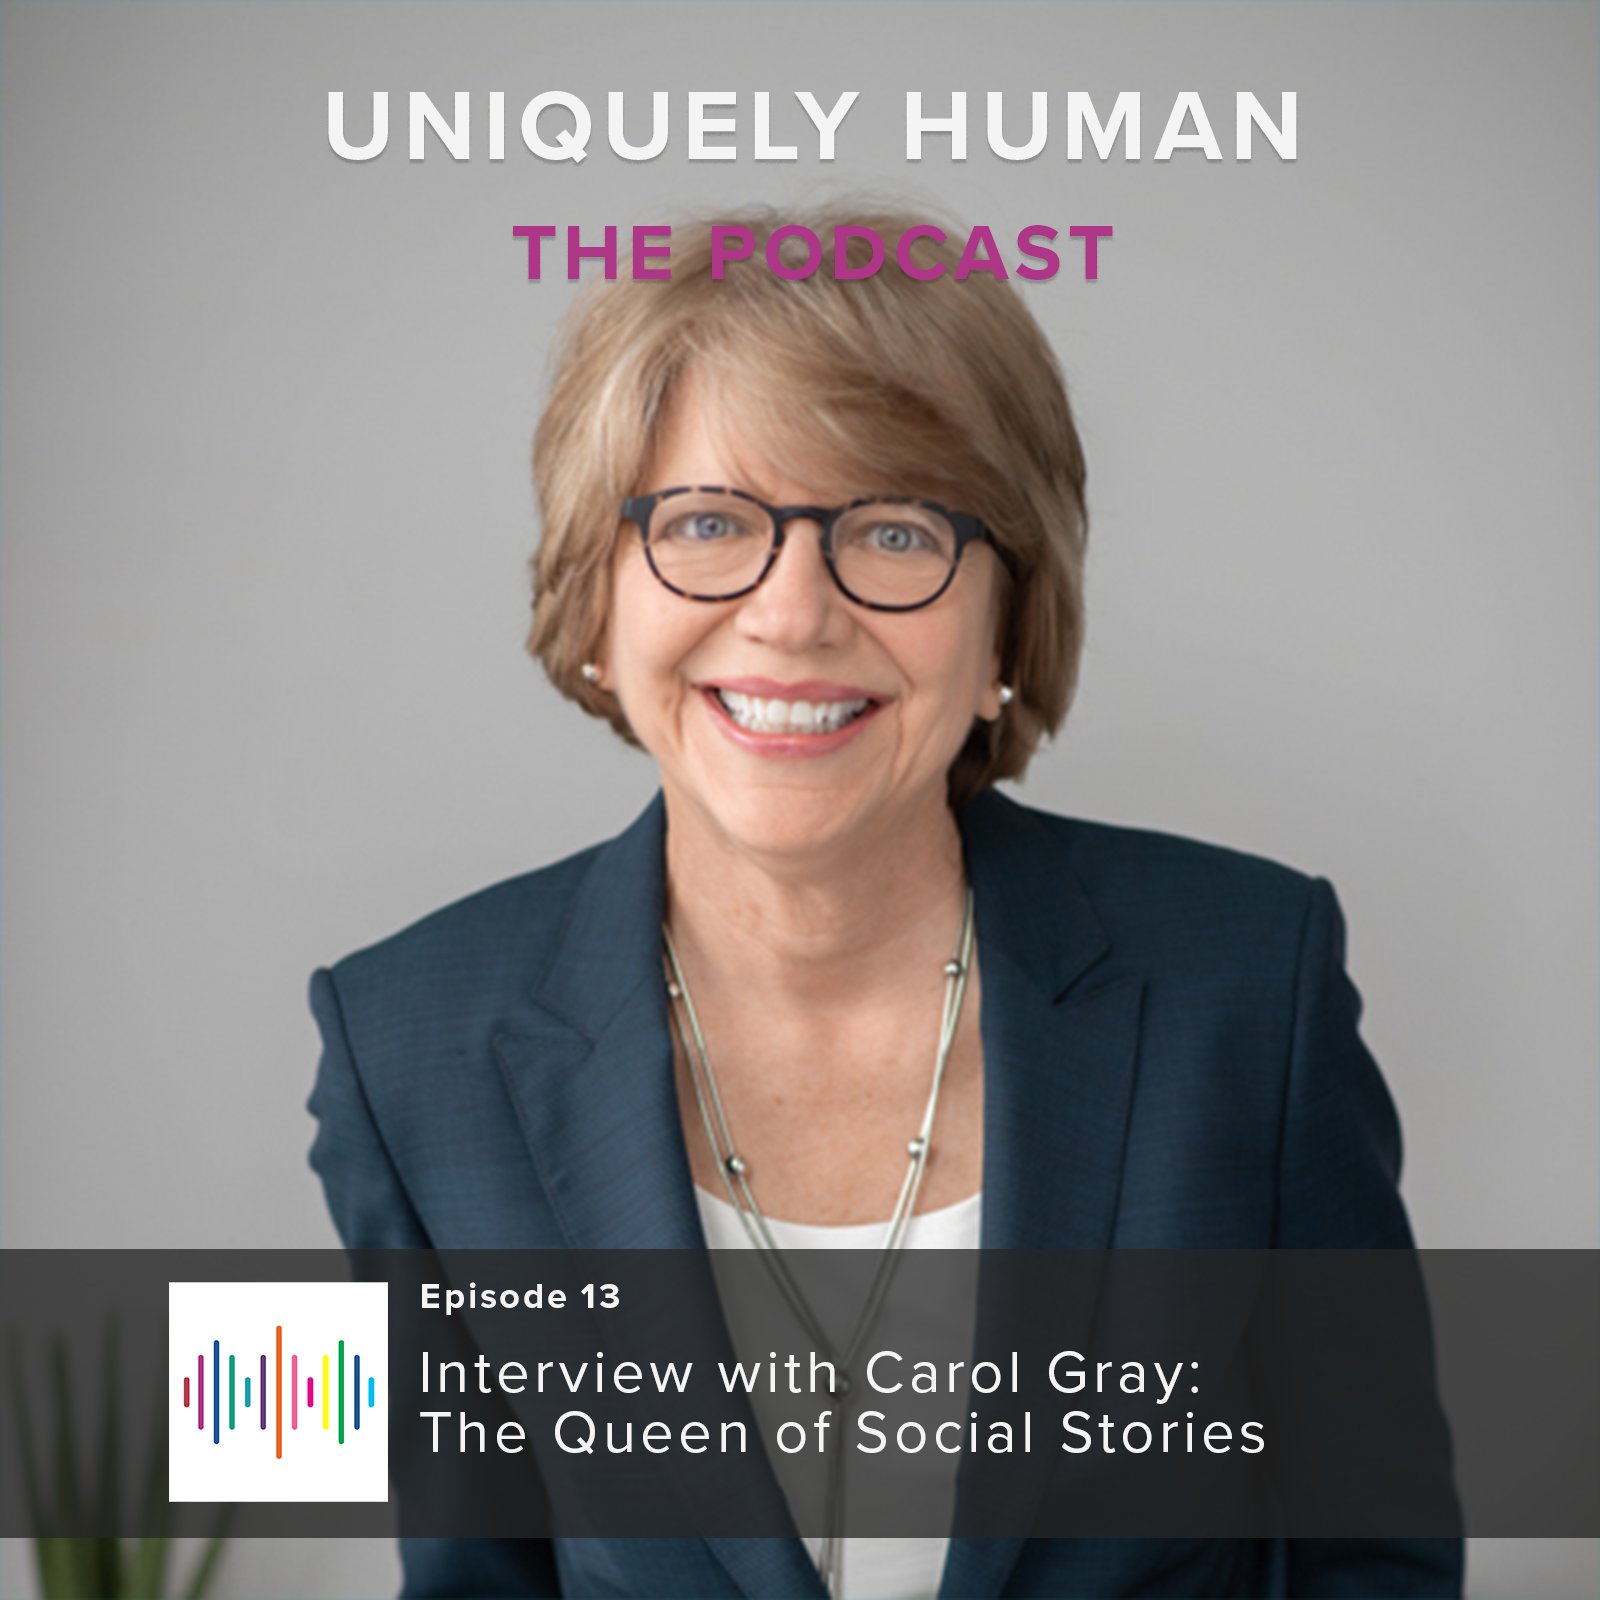 interview-with-carol-gray-the-queen-of-social-stories-uniquely-human